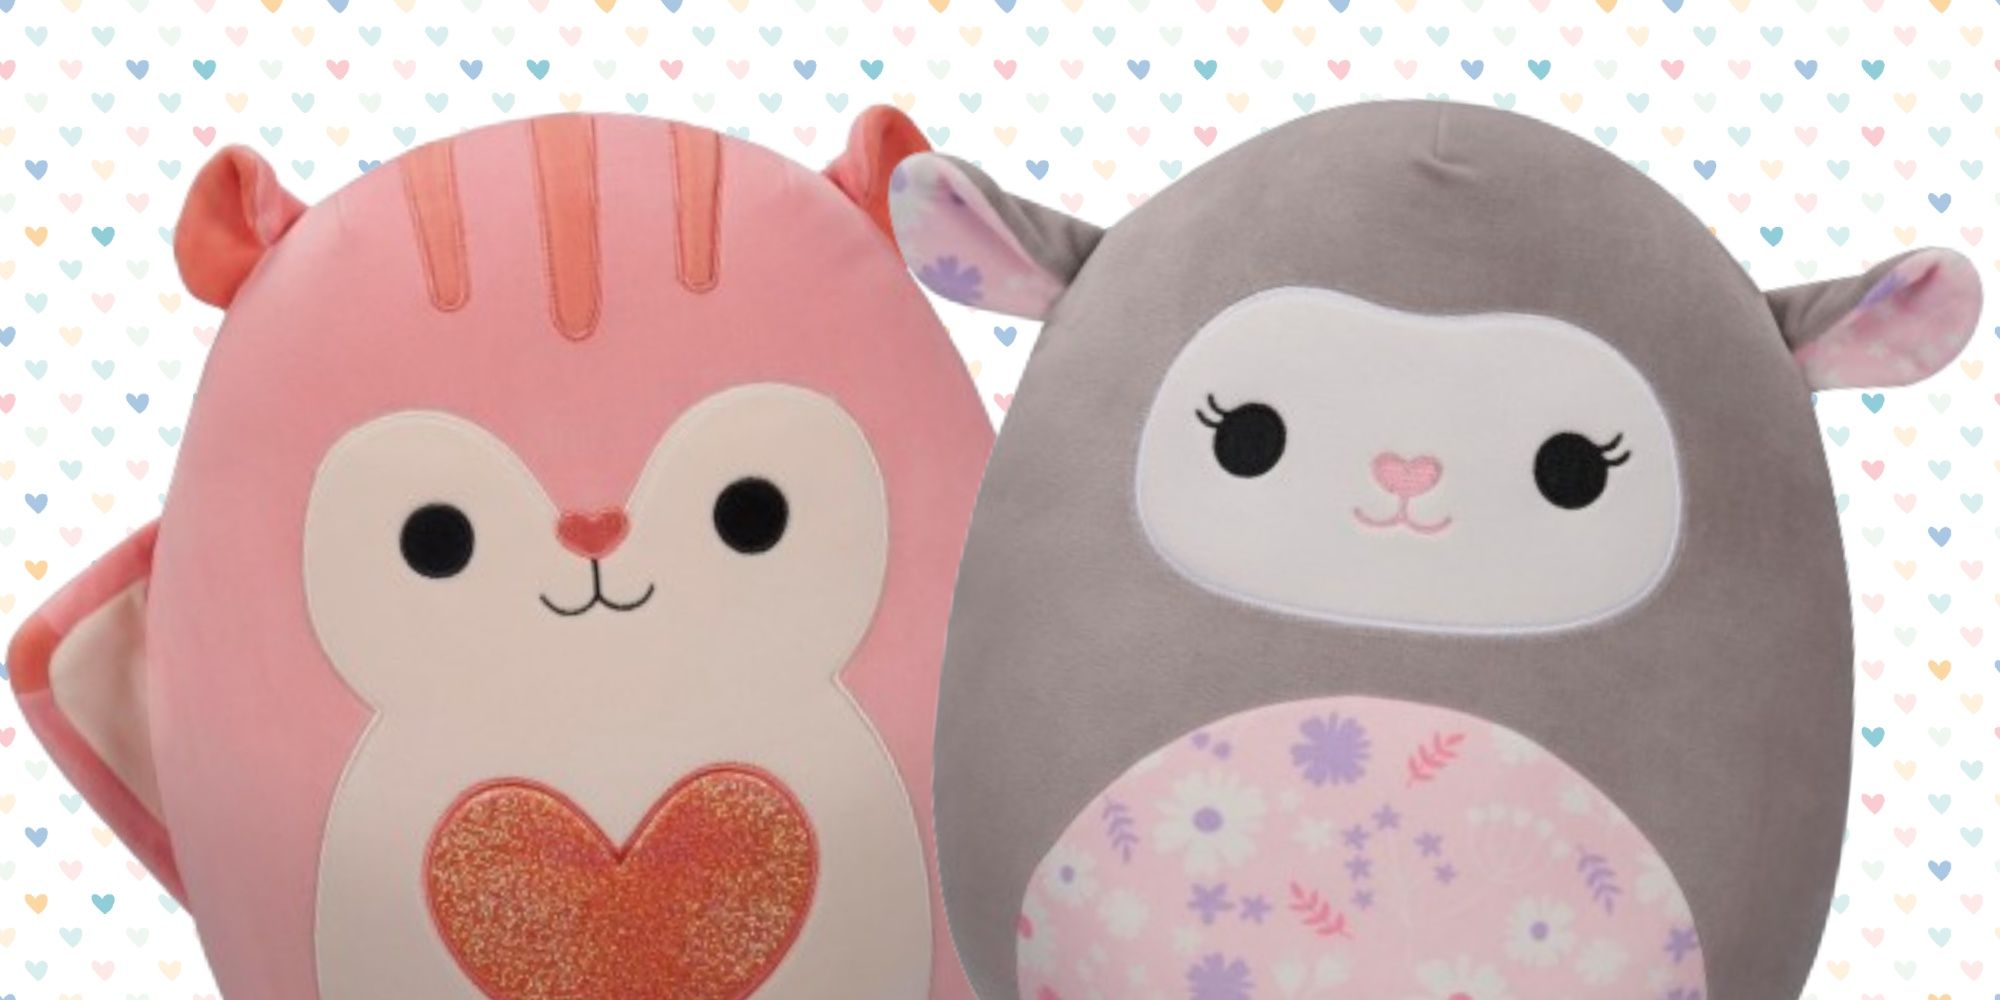 Flying squirrel and lamb Squishmallows on a heart pattern background